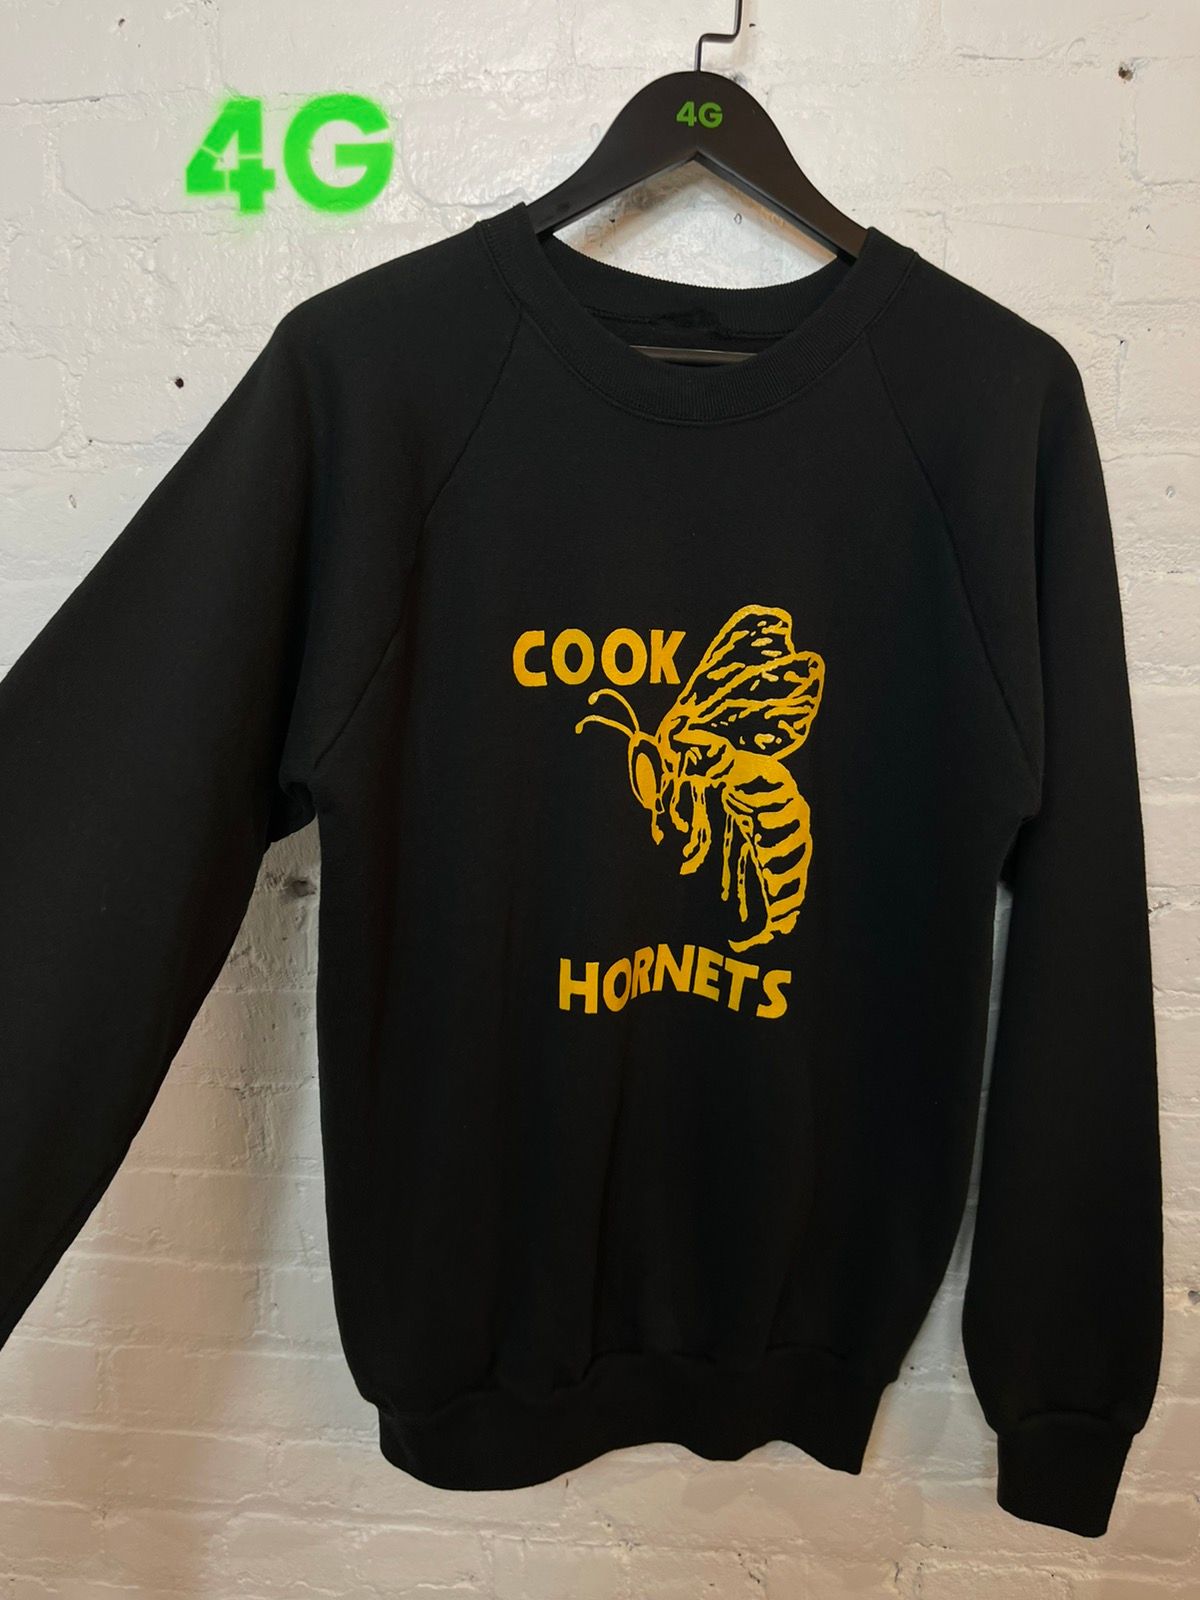 Vintage 90s HORNETS School sweater pullover Shirt